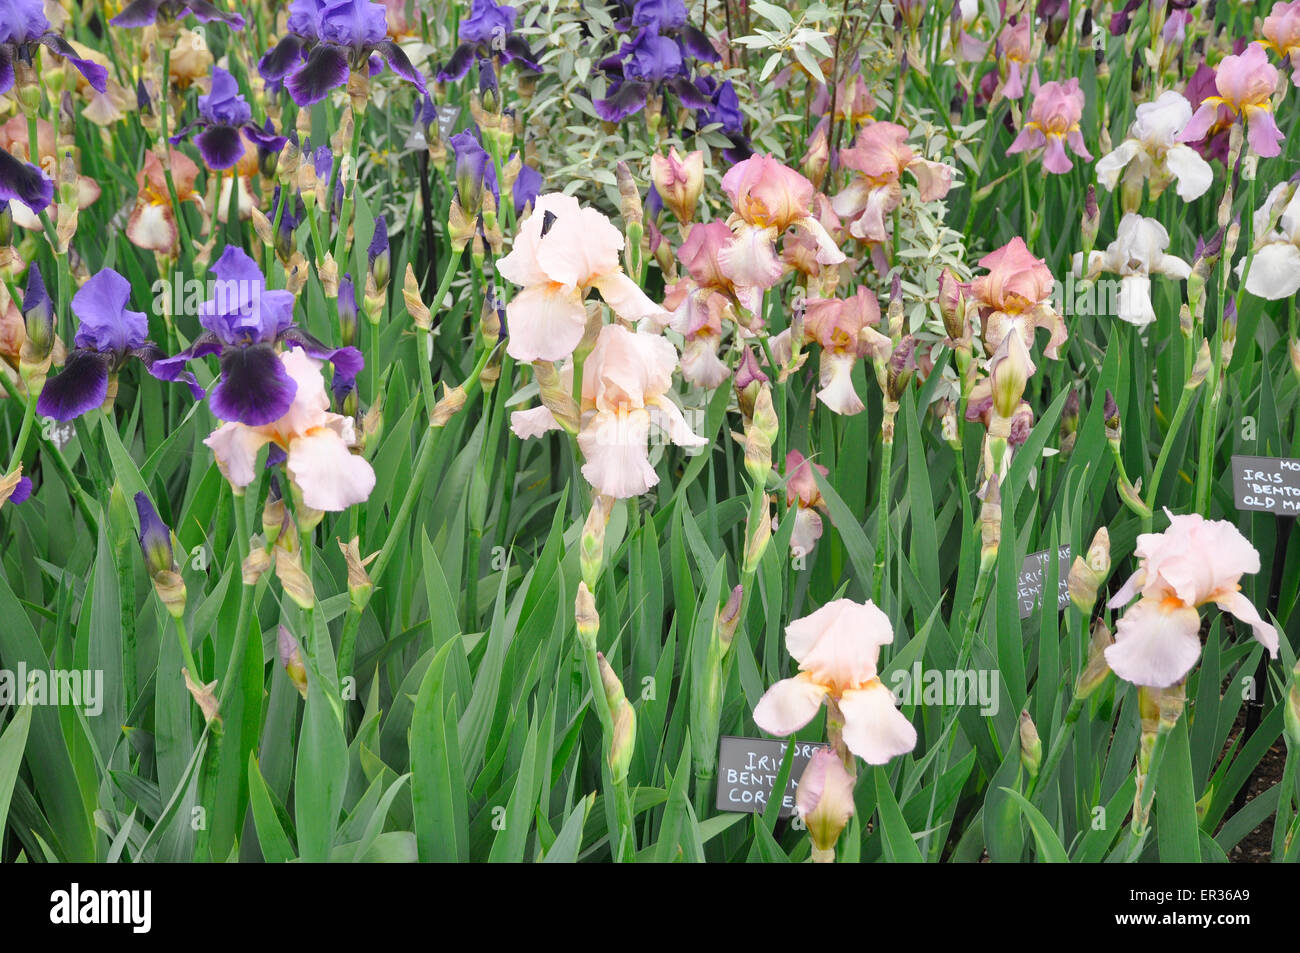 RHS Chelsea Flower Show 2015 - Benton Irises created by Cedric Morris on display in 'The Great Pavilion'. Stock Photo